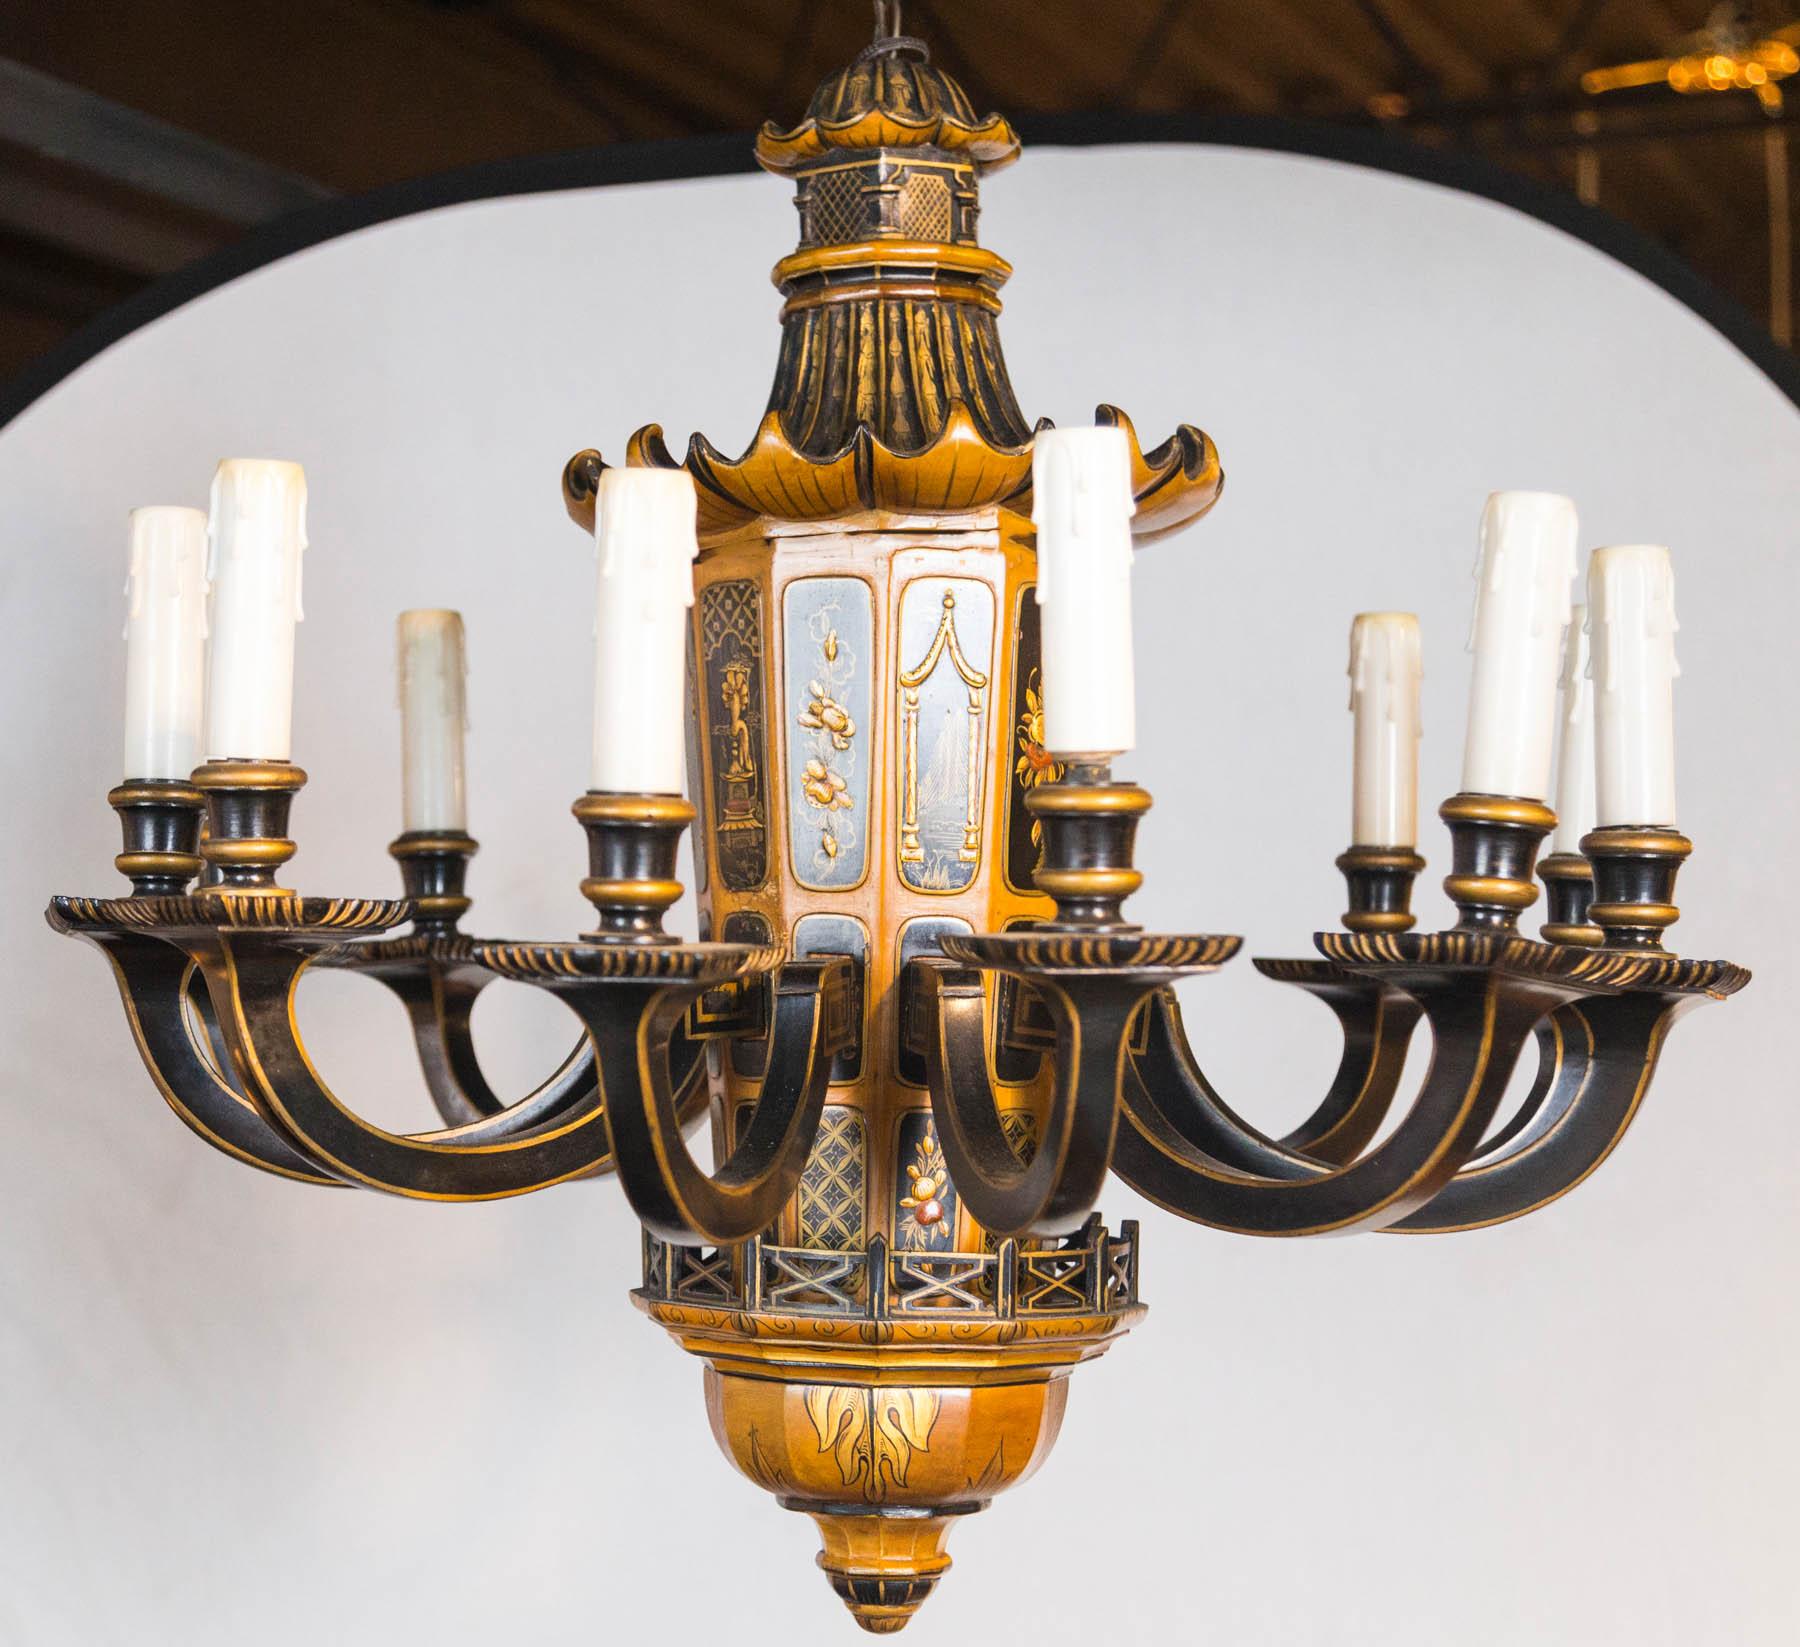 A 12-light French lacquered chandelier attributed to Maison Jansen, circa 1940s. Having rich raised hand painted and applied chinoiserie decoration on wood with an iconic pagoda form dome.